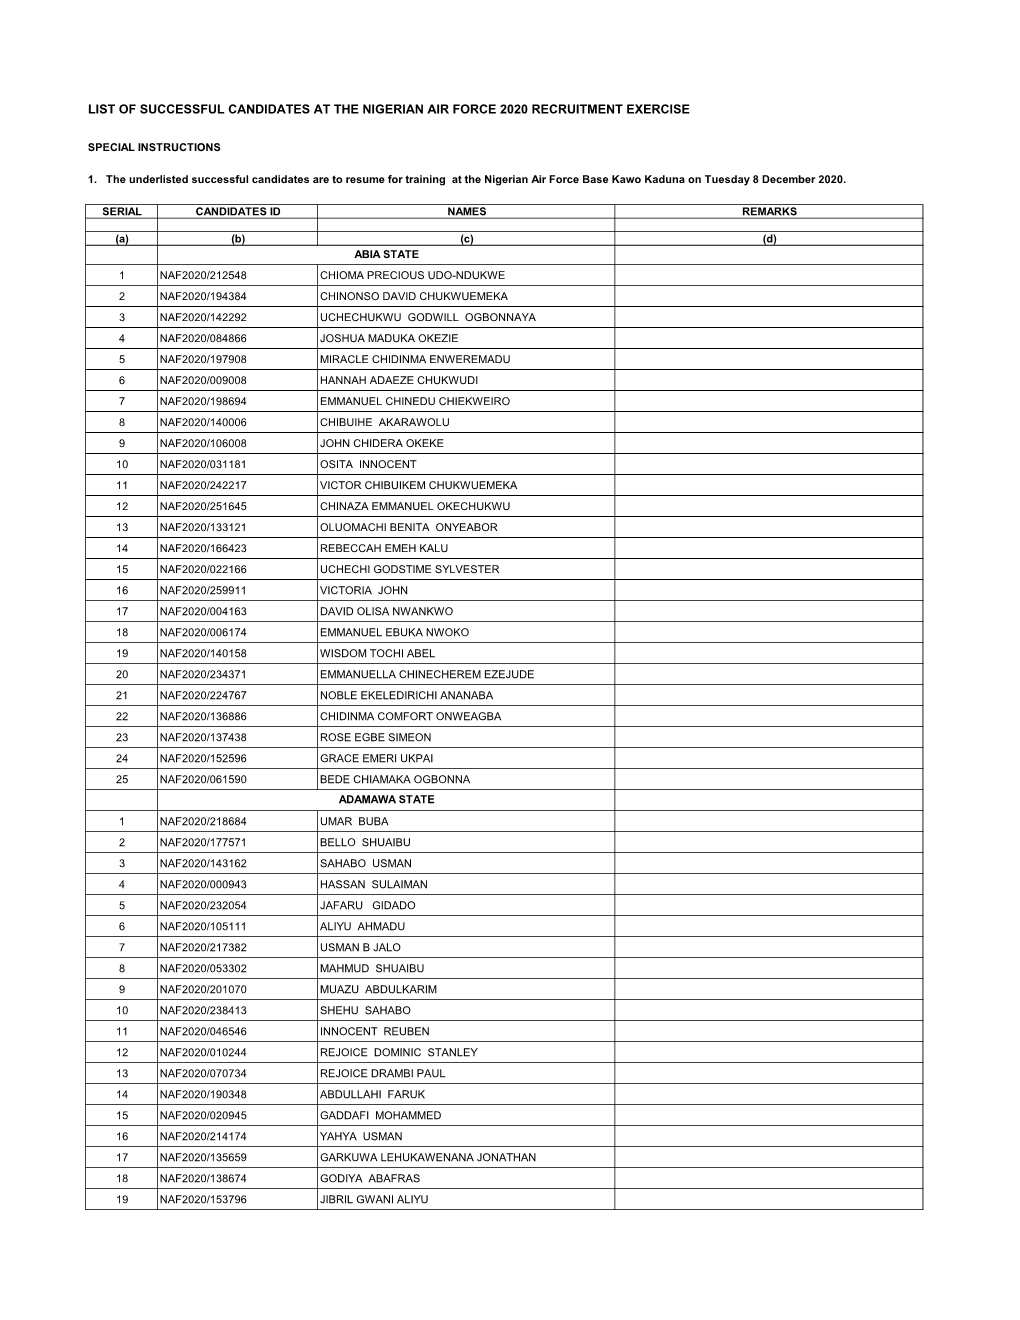 List of Successful Candidates at the Nigerian Air Force 2020 Recruitment Exercise